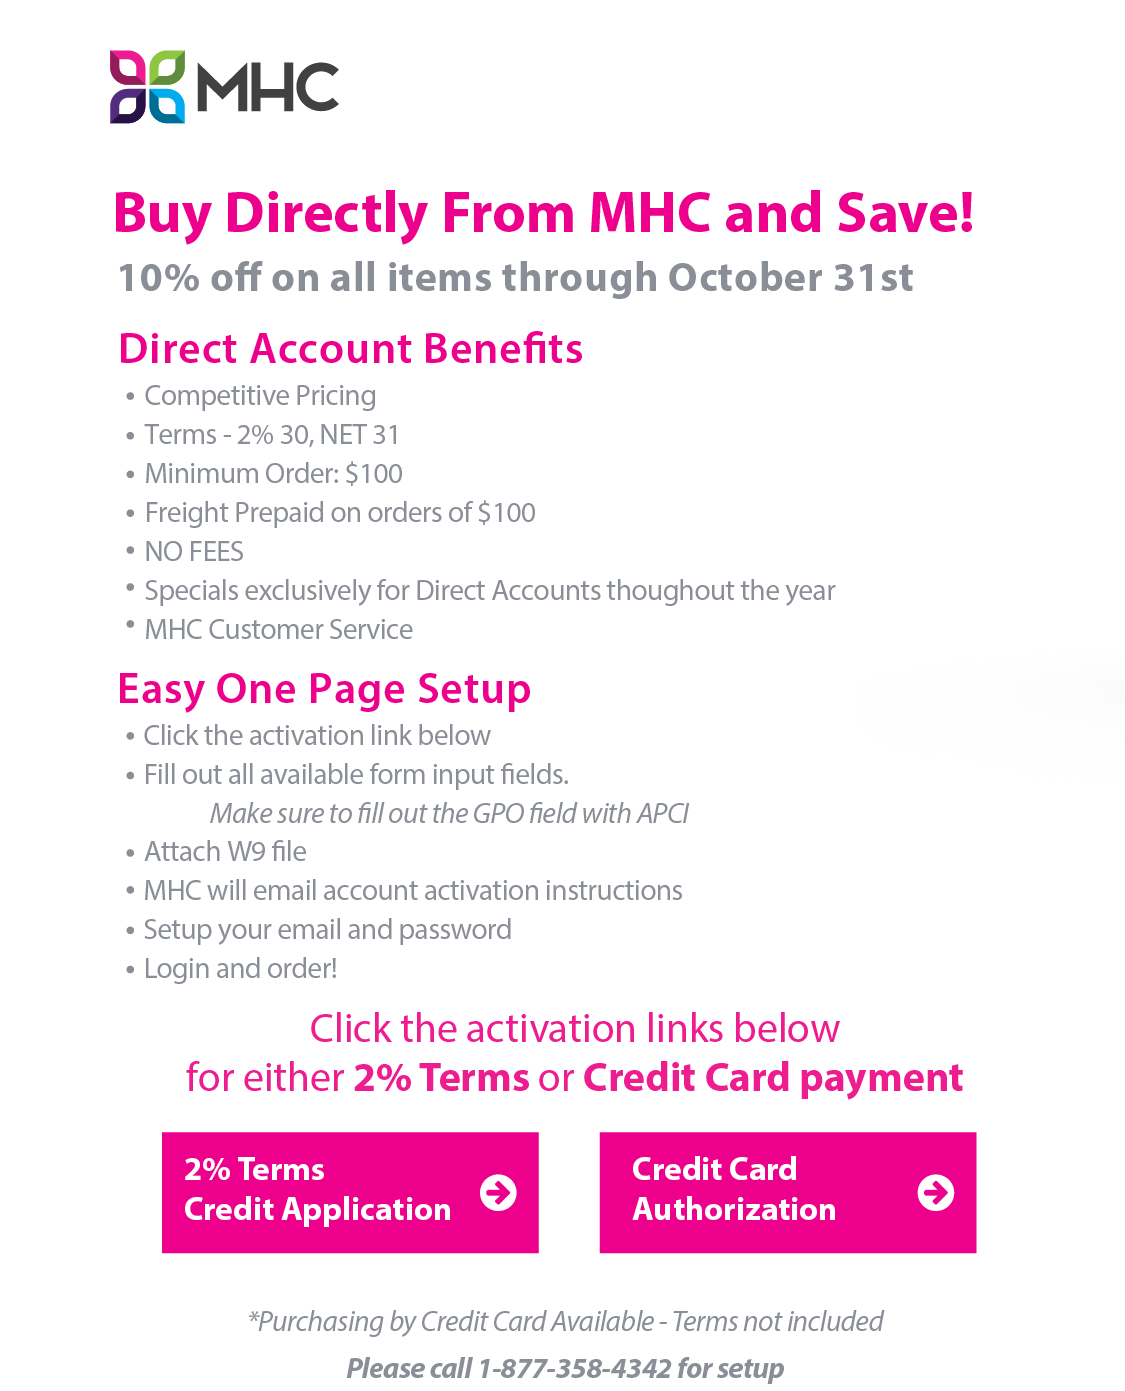 MHC Medical Products promo sheet October 2022